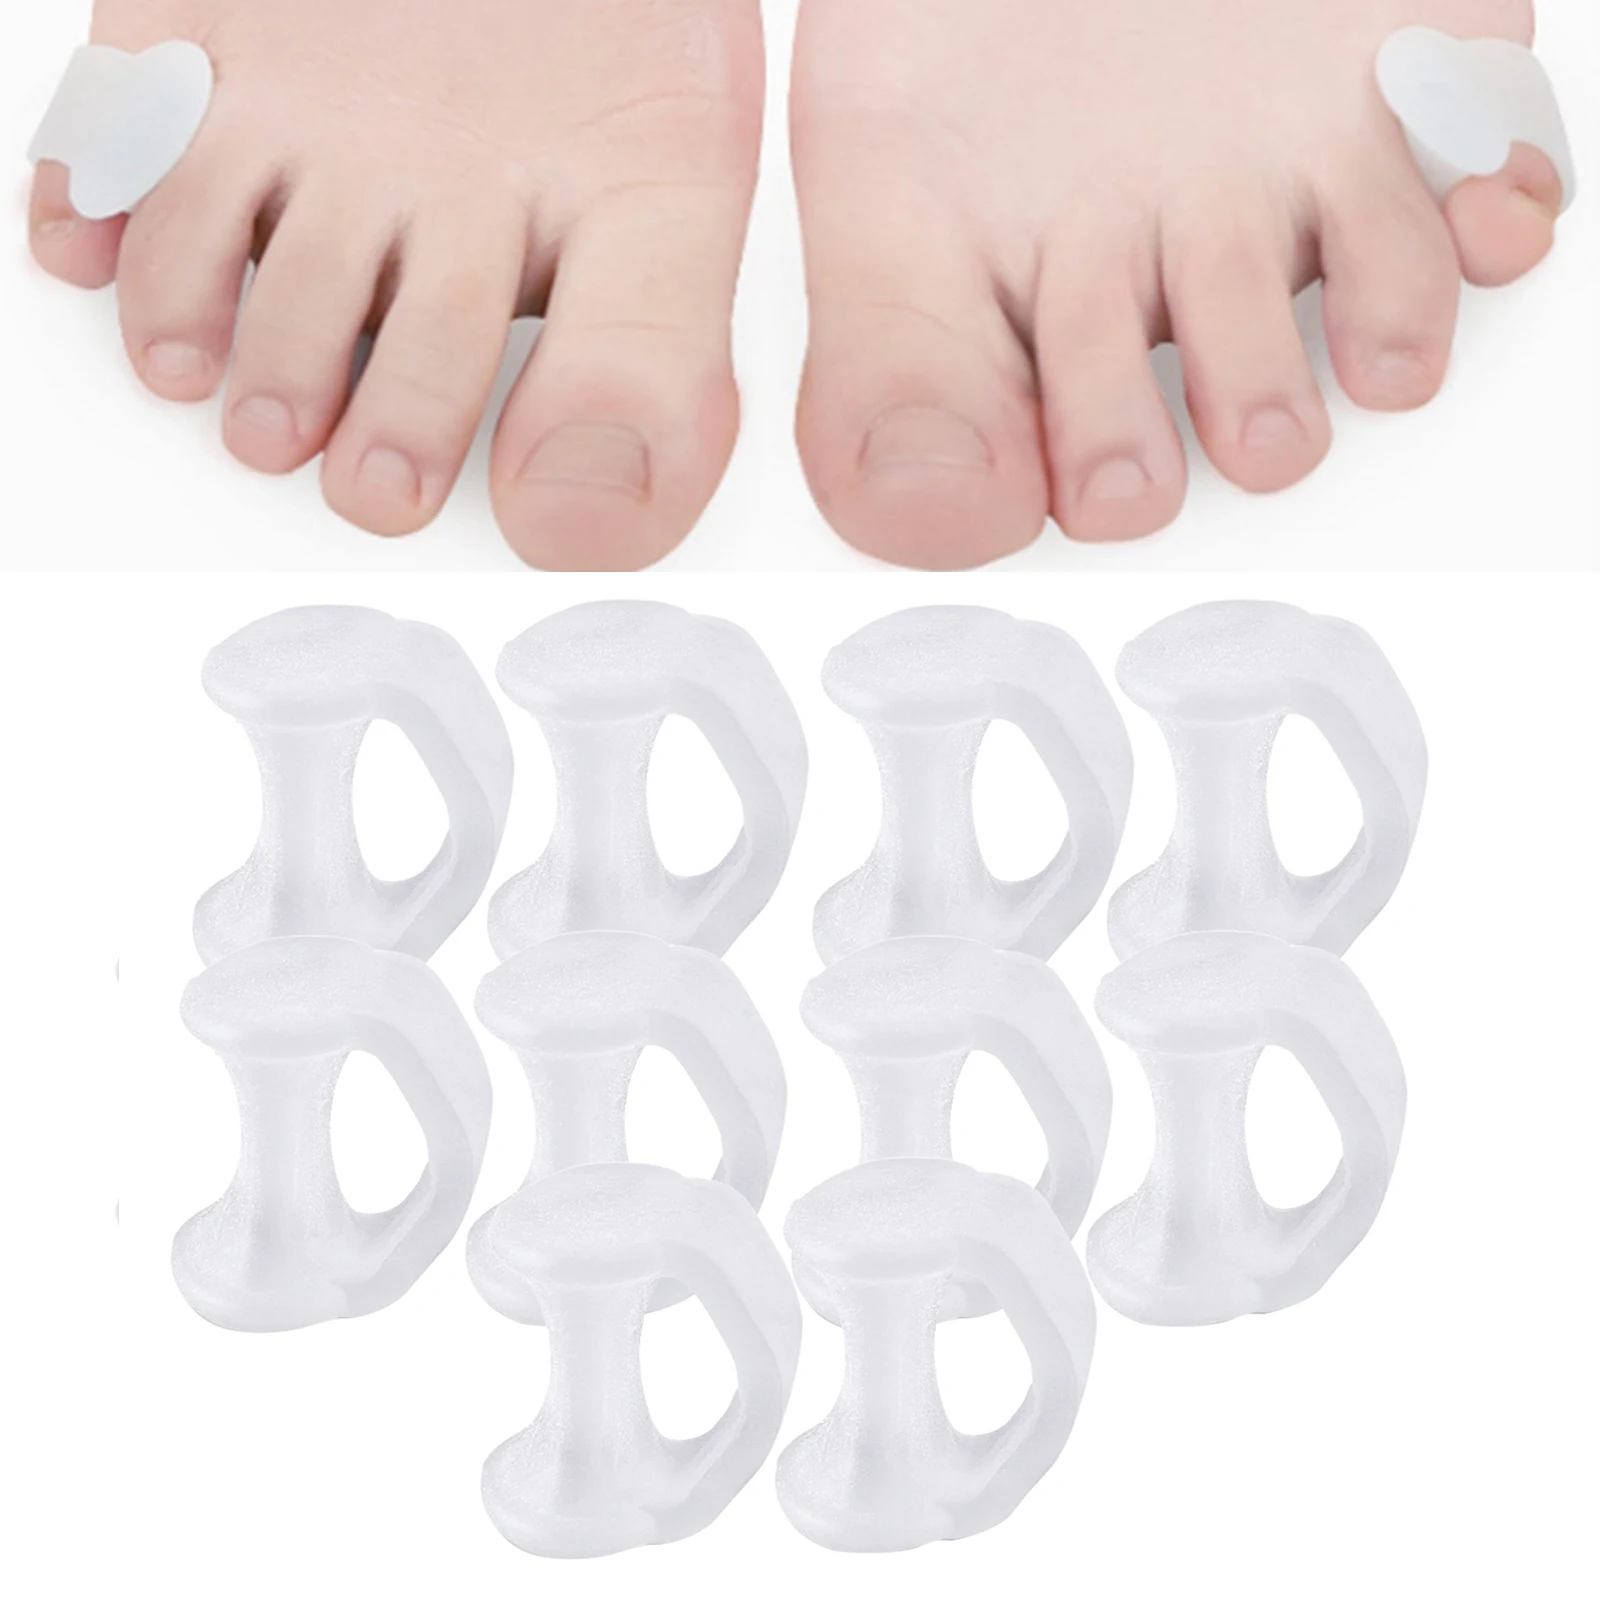 10 Packs Sleeves Pinky Toe Corrector Toe Separators for Overlapping Toes